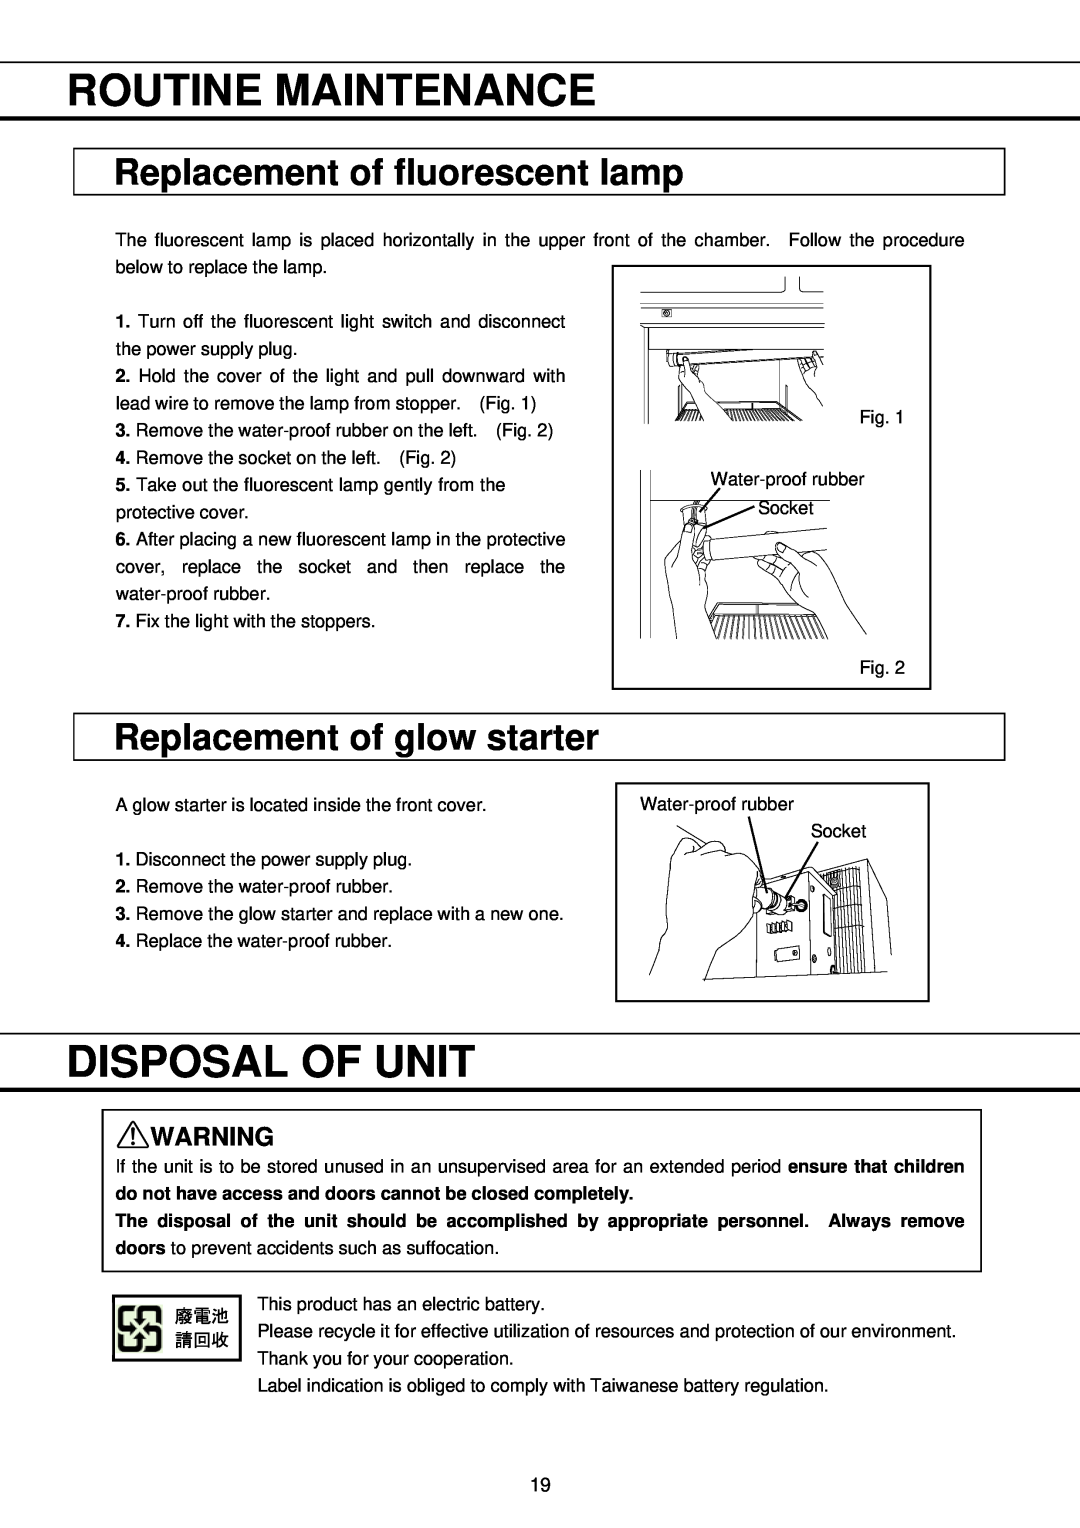 Sanyo MBR-704G Disposal Of Unit, Replacement of fluorescent lamp, Replacement of glow starter, Routine Maintenance 